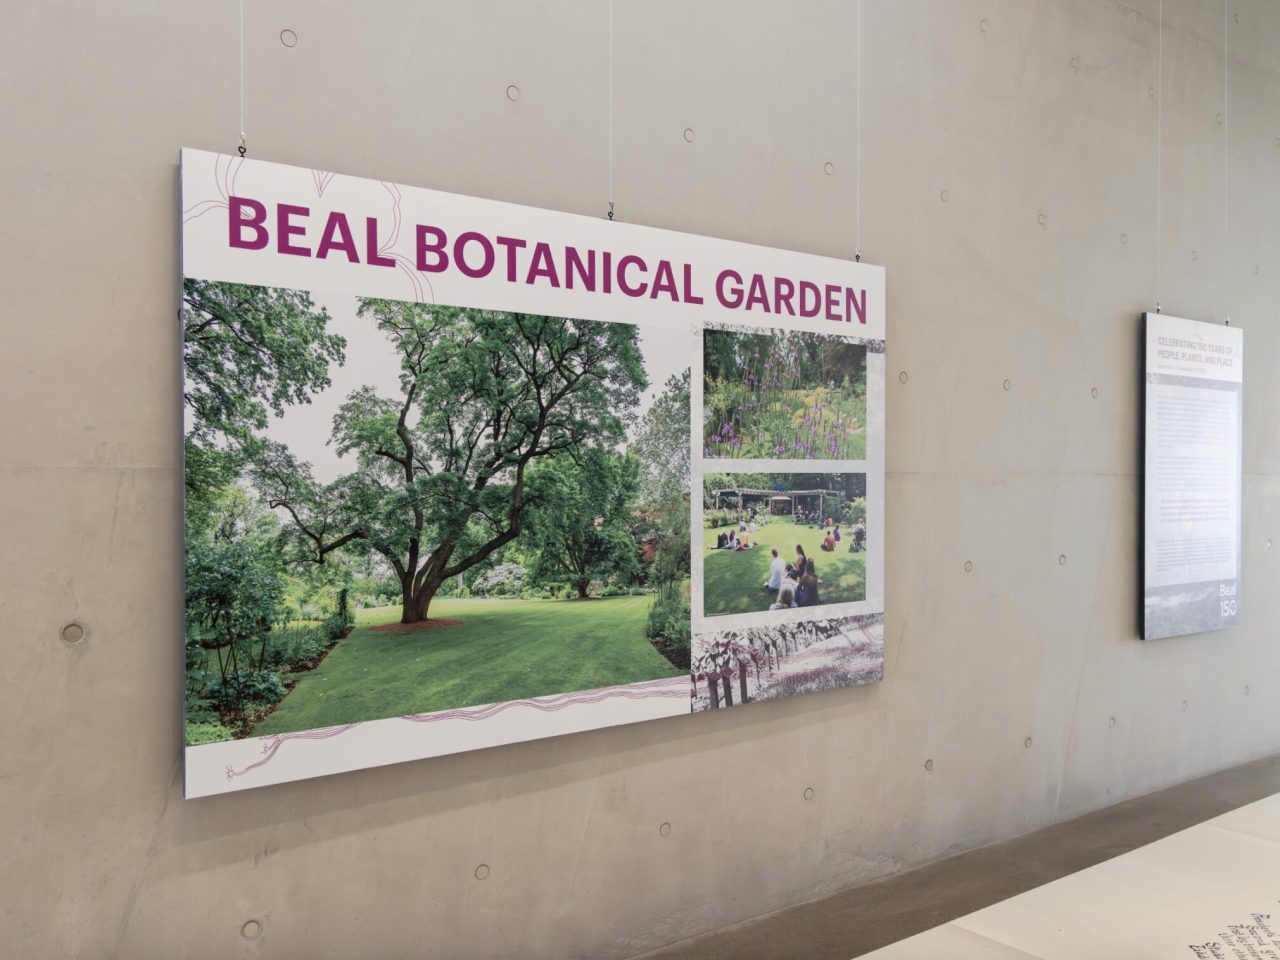 Beal Botanical Garden: Celebrating 150 years of people, plants, and place installation view